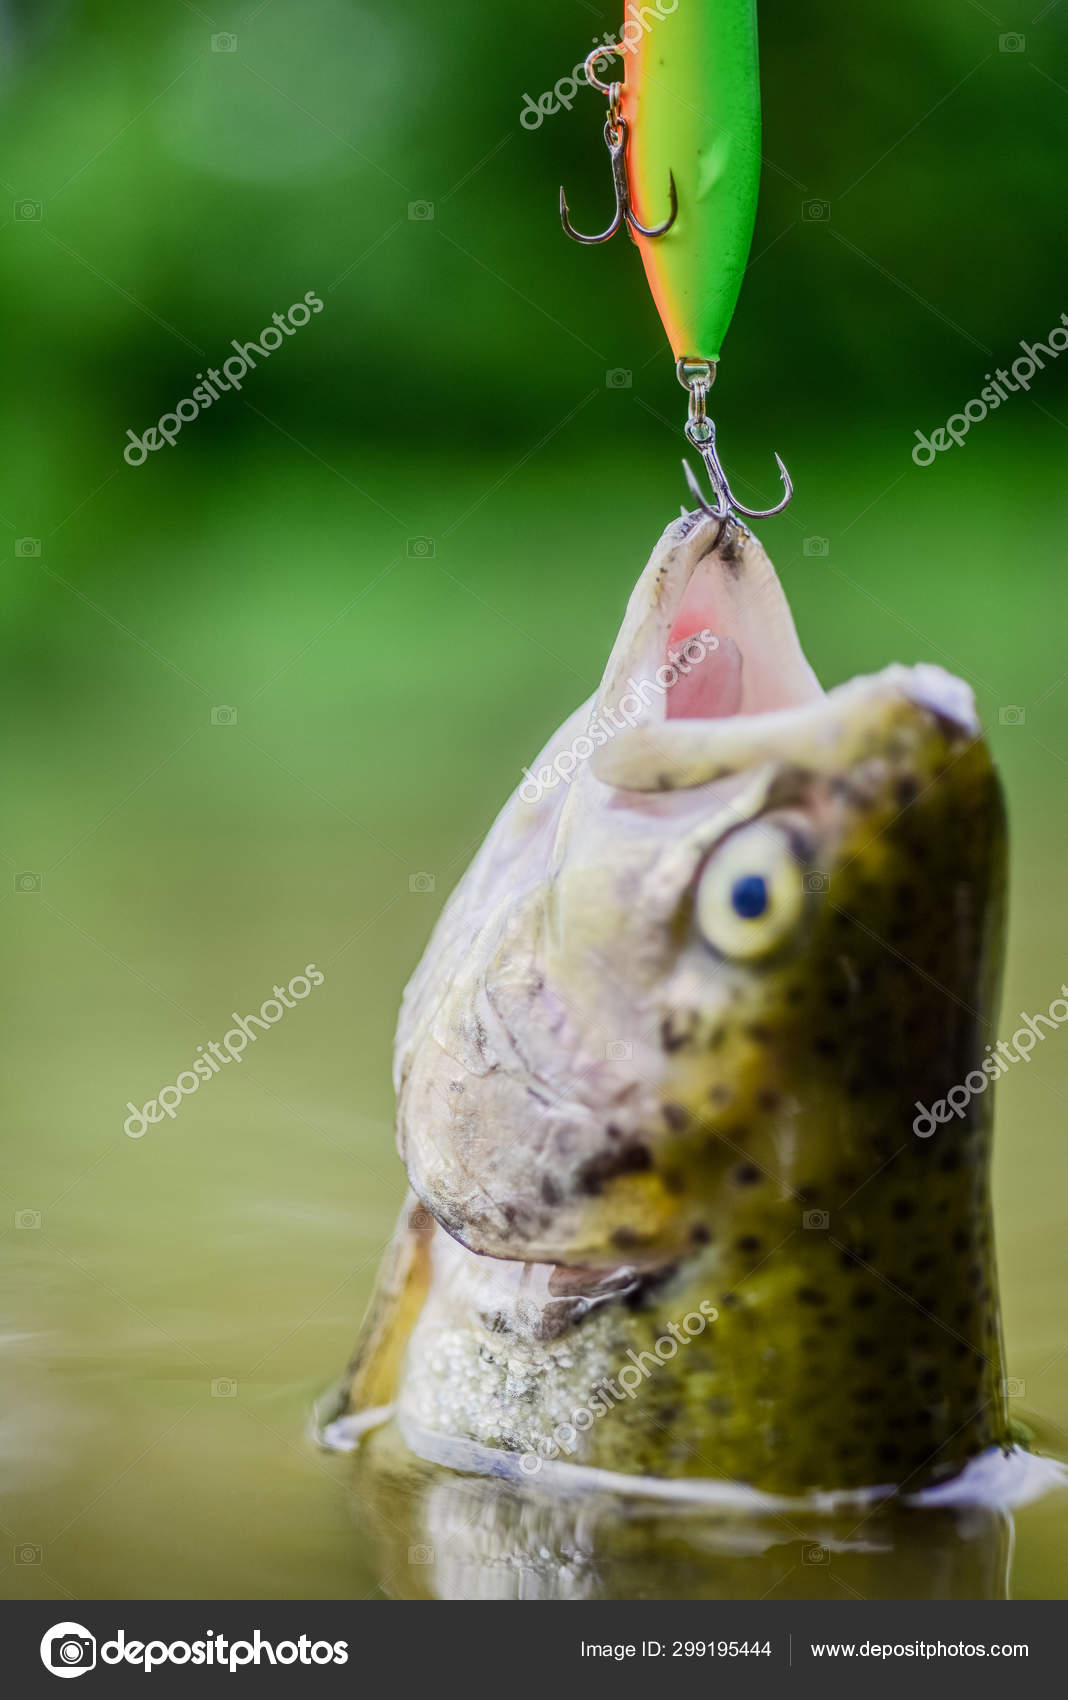 Fish trout caught in freshwater. Fish open mouth hang on hook